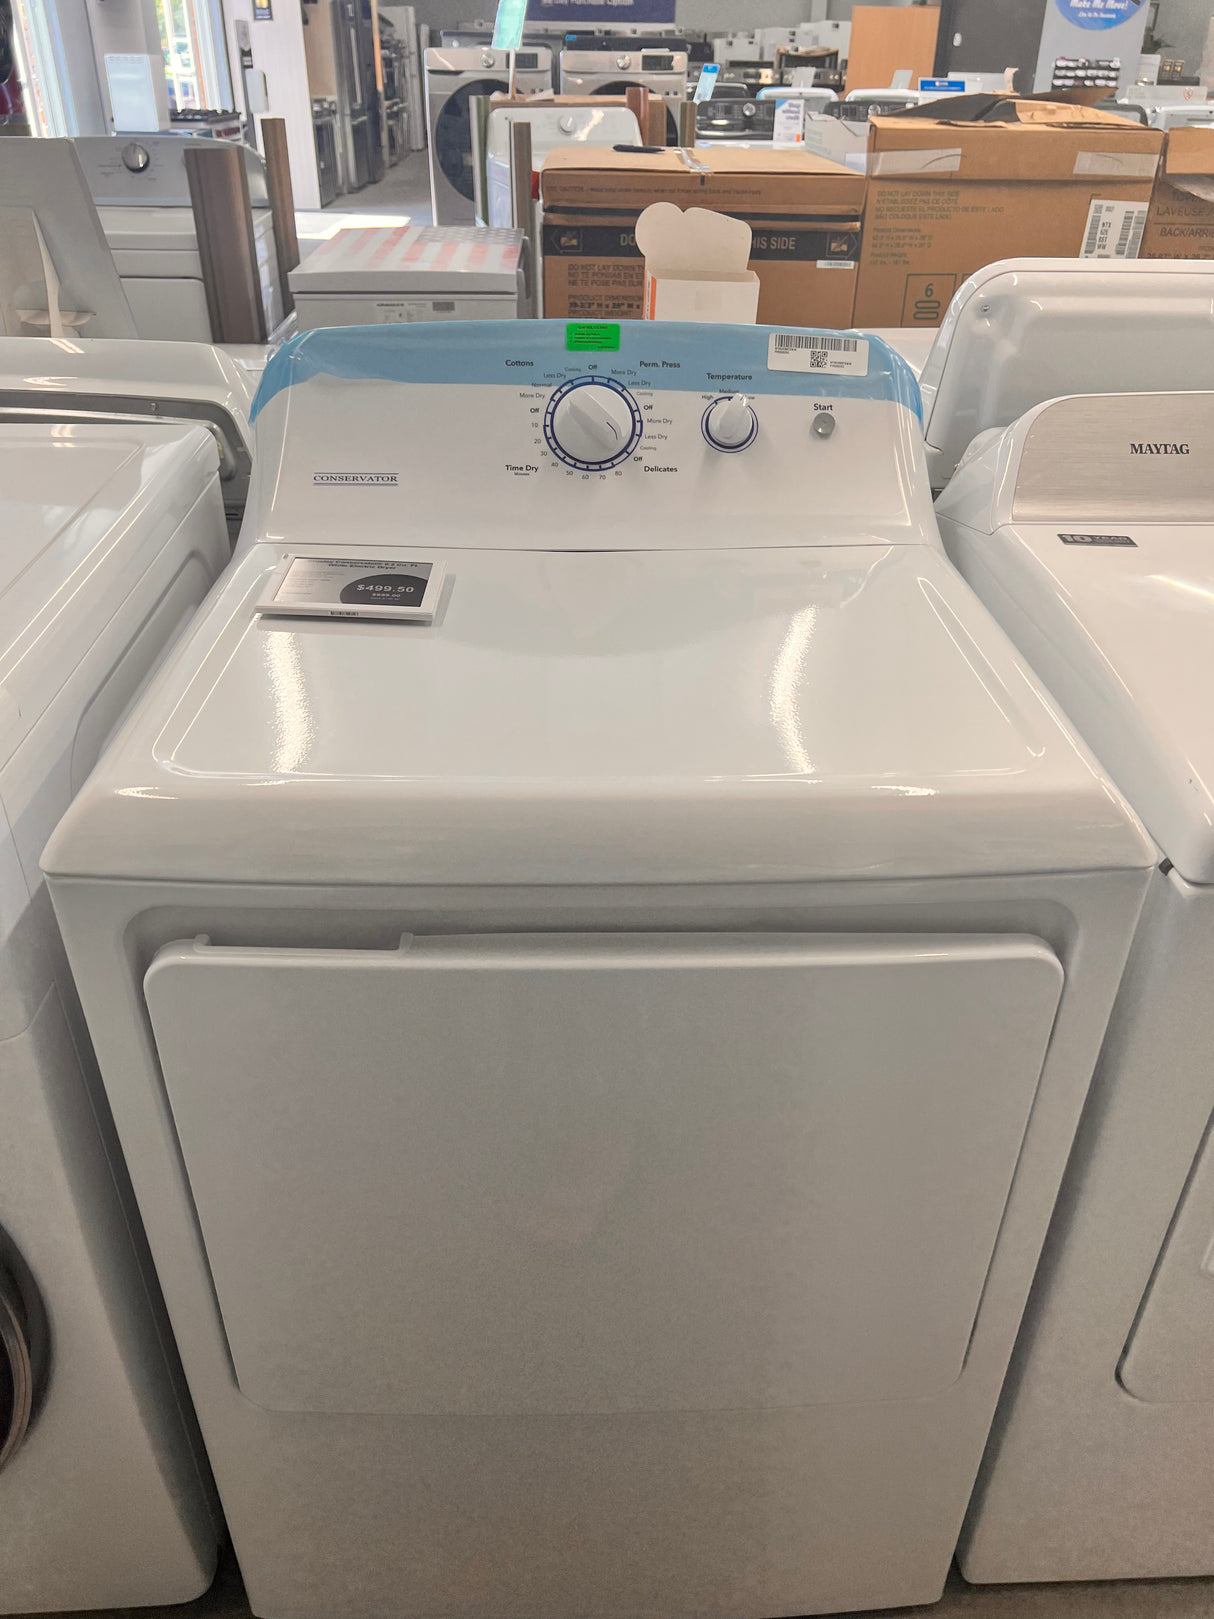 Crosley Conservator  6.2 ft.³ white electric dryer NTX62E8STWW